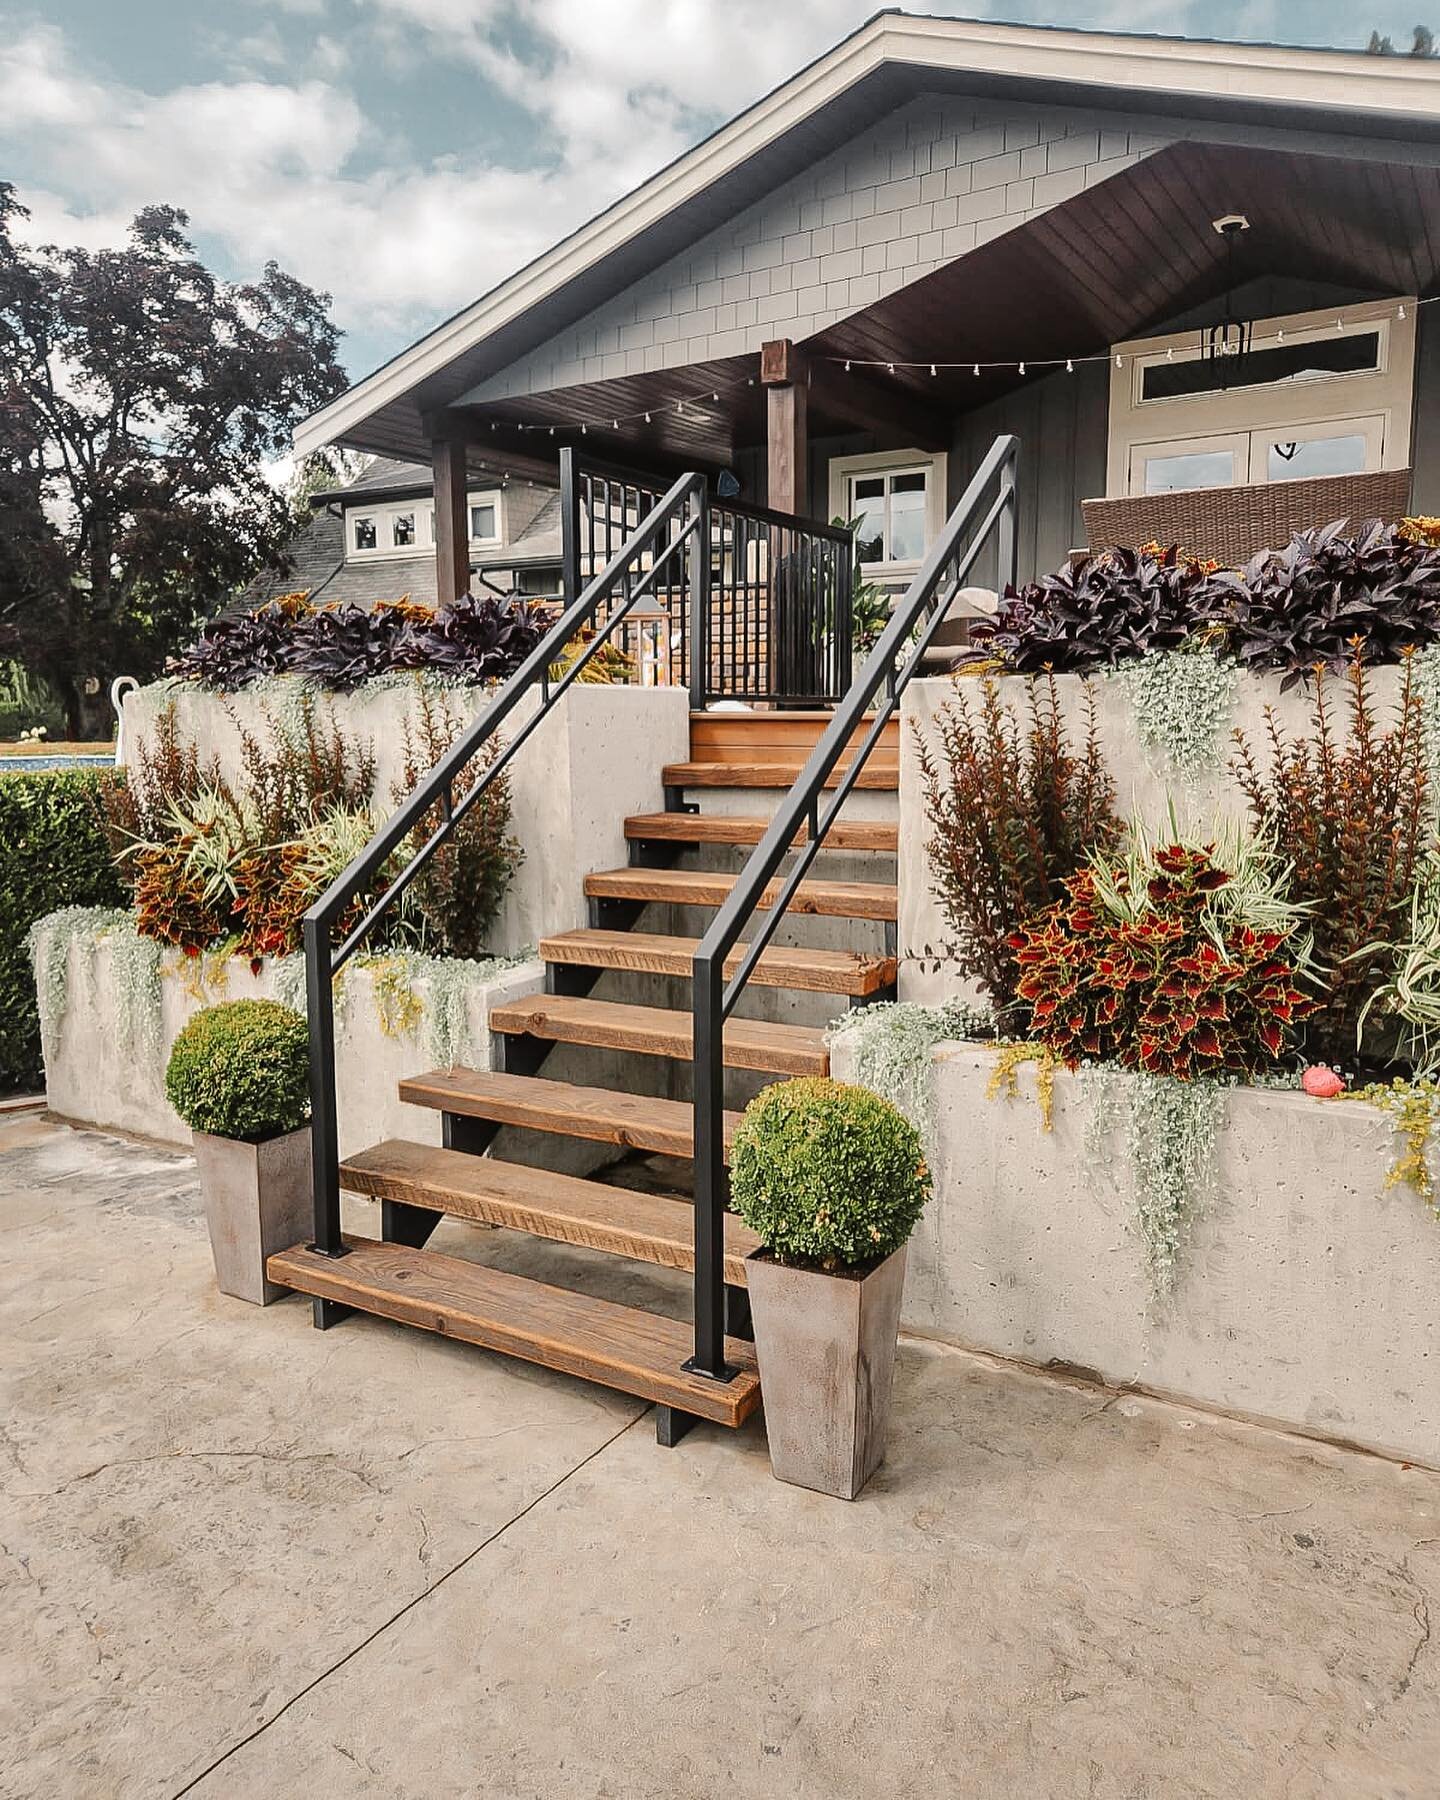 A simple and modern handrail we installed this past summer. A great way to elevate your patio steps💯

This picture has got us all wishing for warmer weather!☀️ stay safe and warm everyone!❄️

#outlawindustriesltd #chilliwackfabrication #metalwork #m